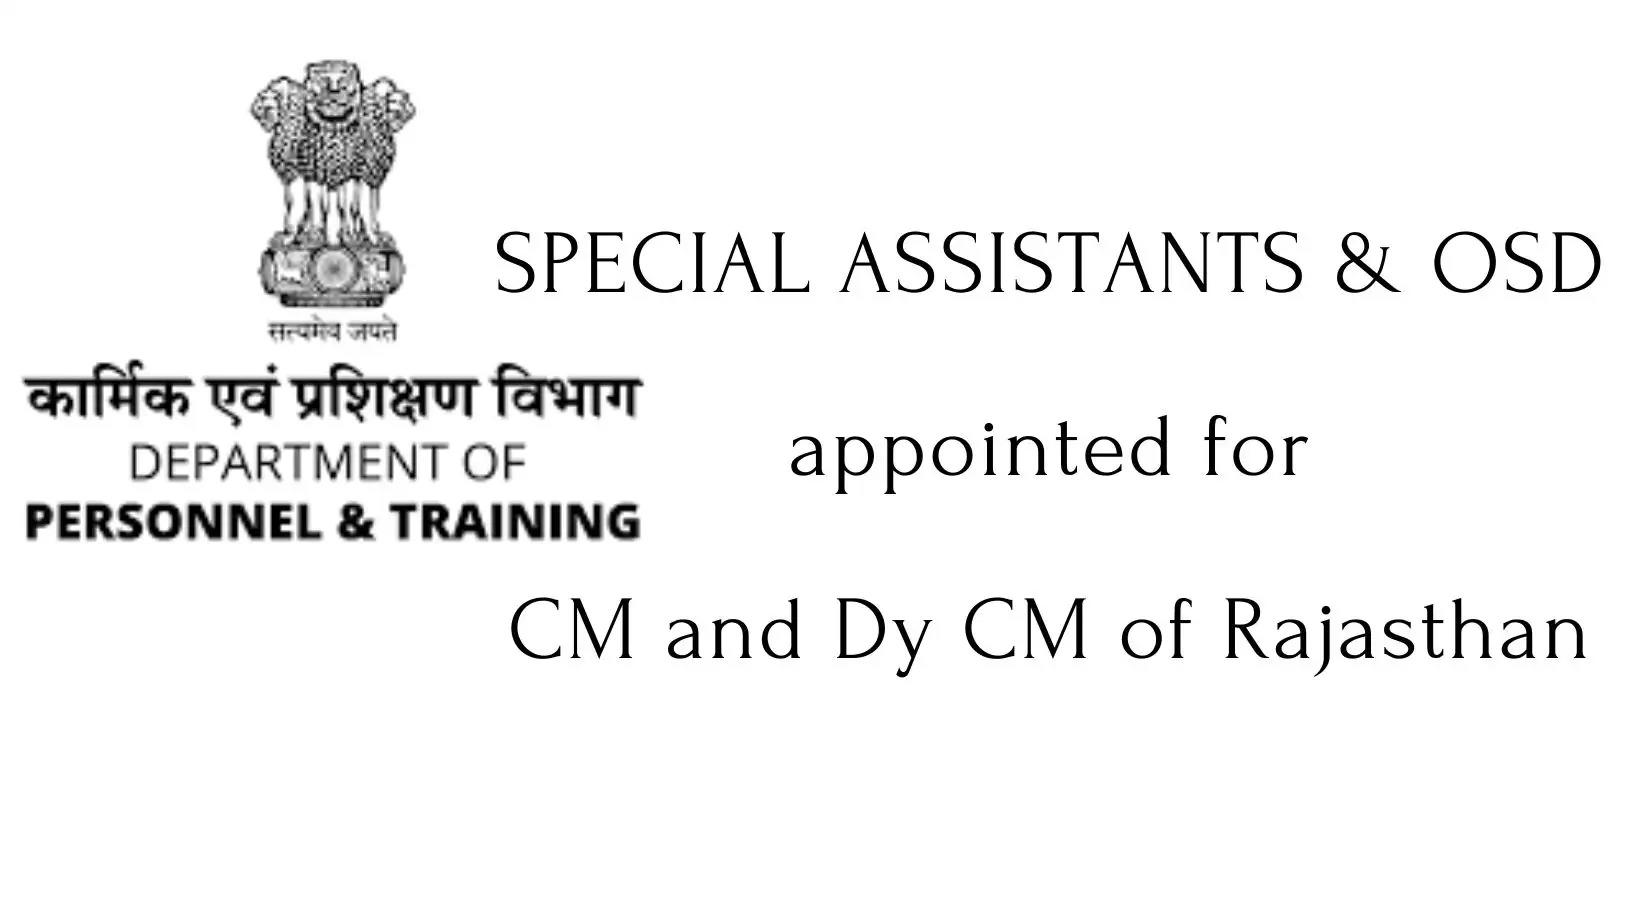 department of personnel osd and special assistant to chief minister and deputy chief minister of rajasthan